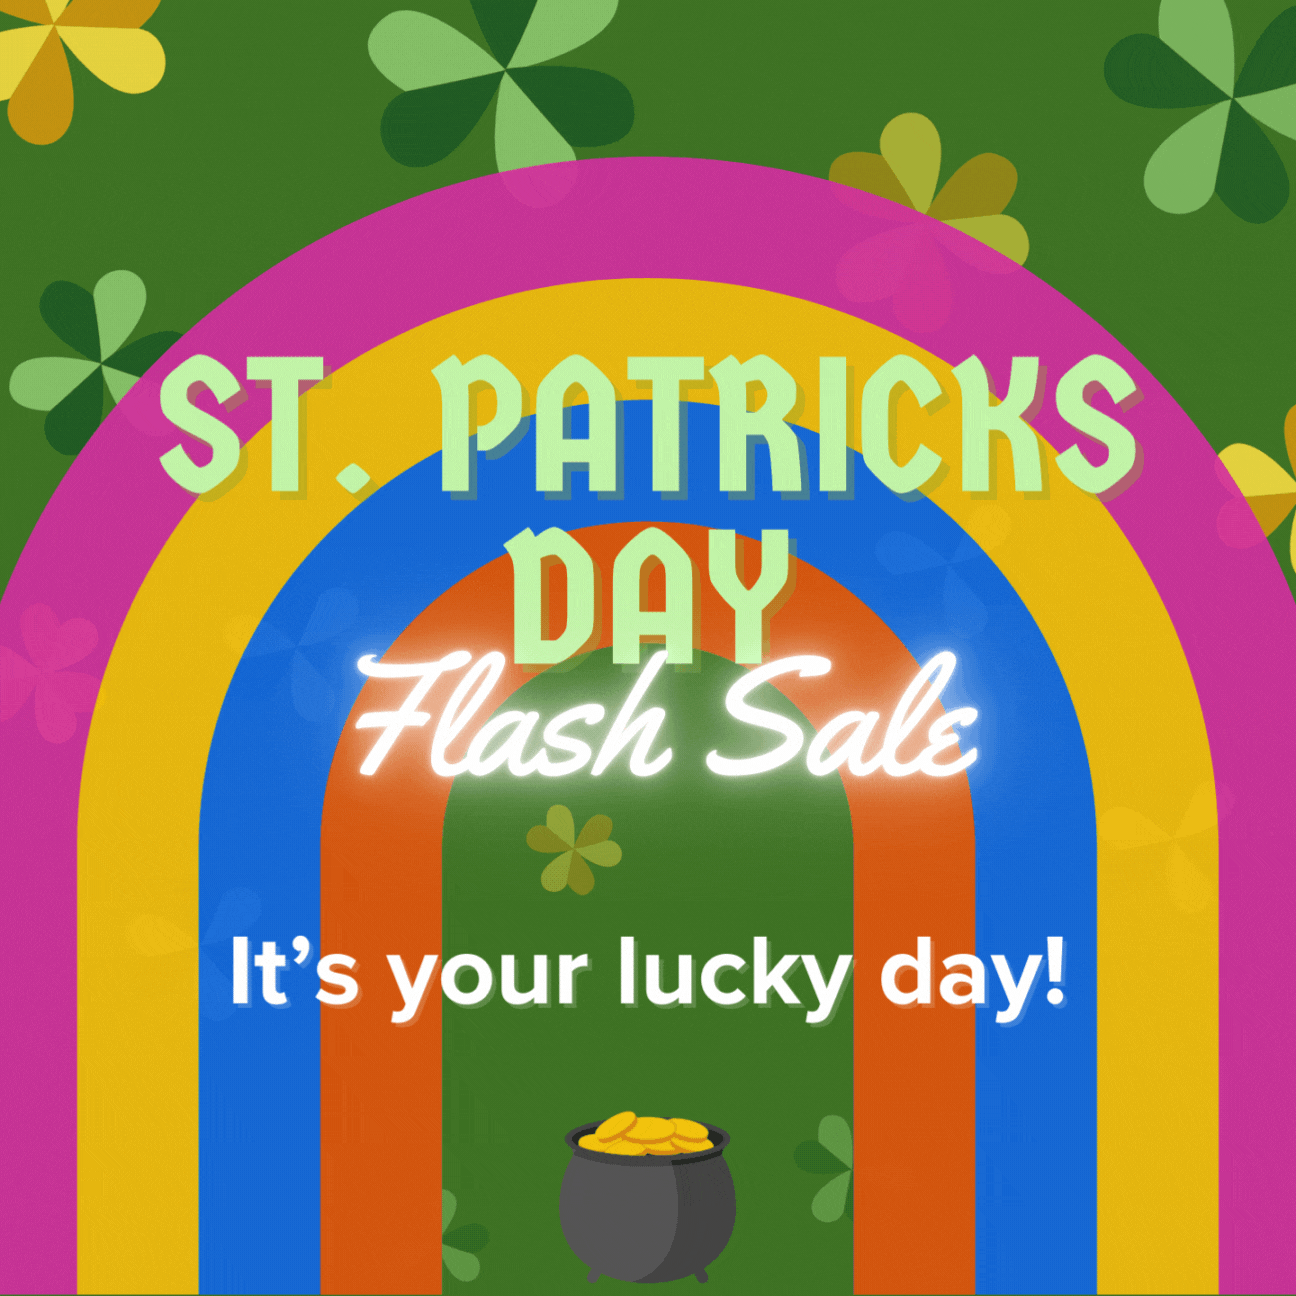 Image contains a green background, green and yellow shamrocks, a rainbow, and a glittering black pot of gold with the words "St. Patrick's Day Flash Sale" and "It's your lucky day"